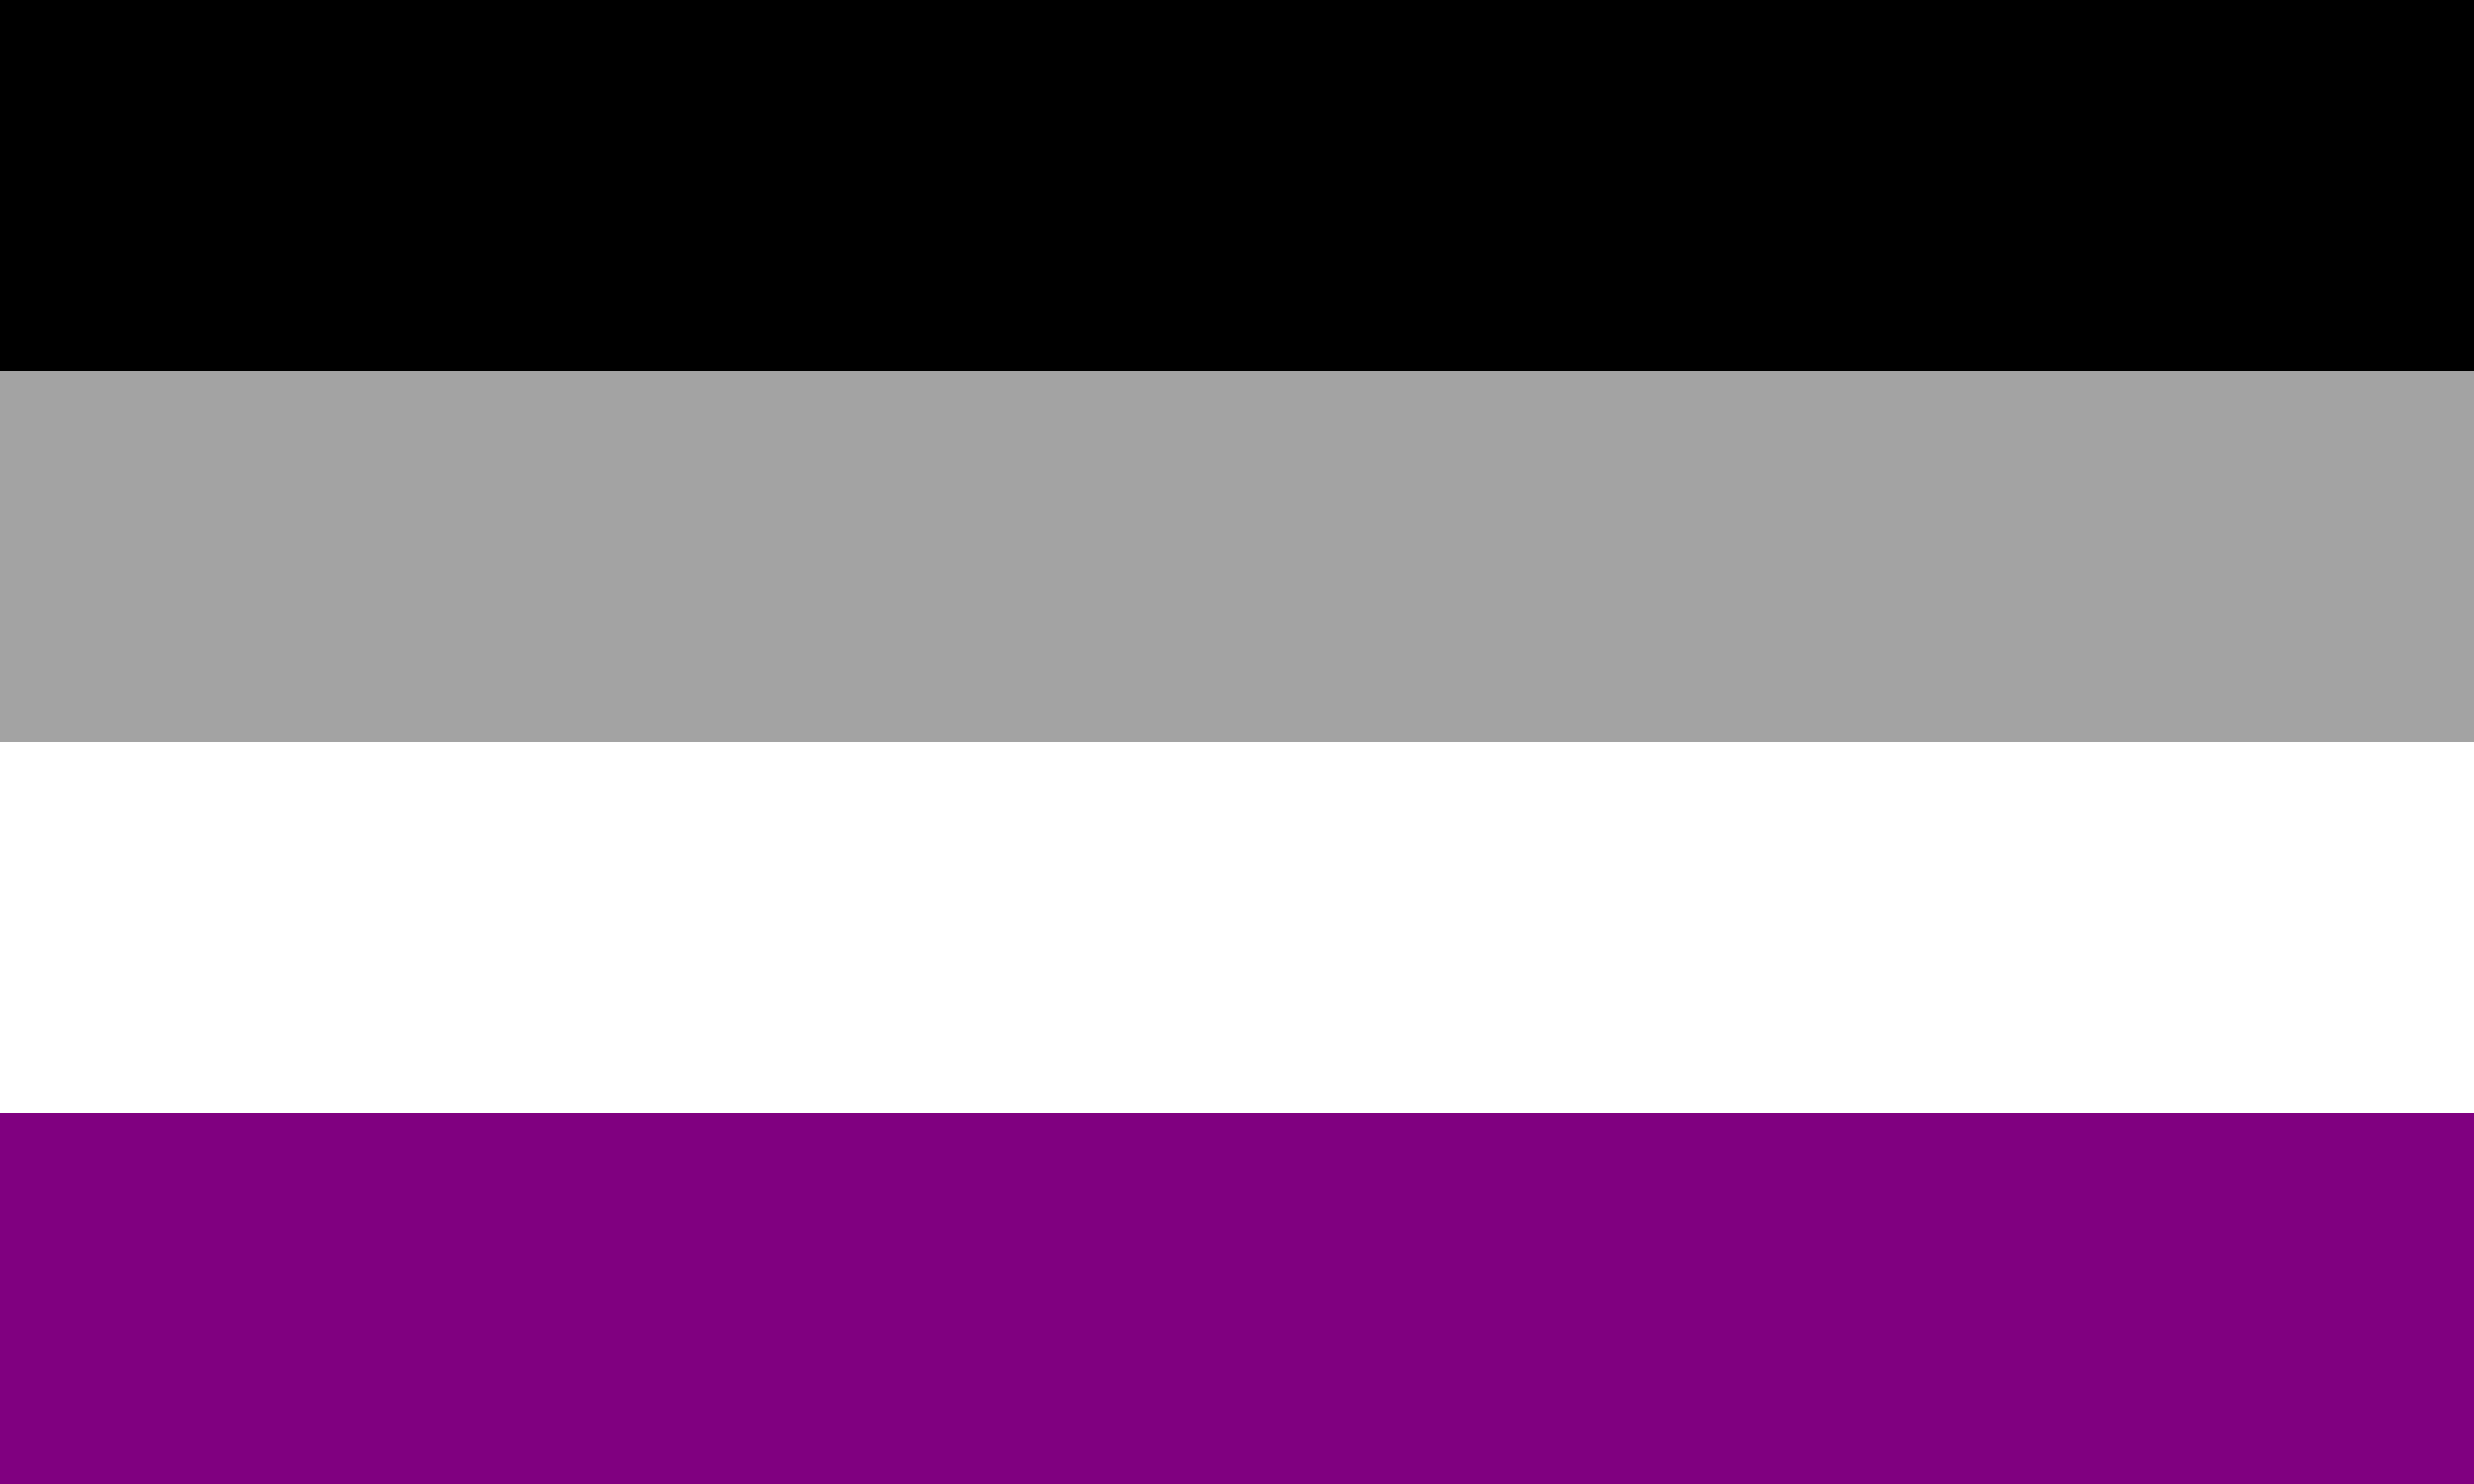 The asexual flag, made of black, grey, white, and purple